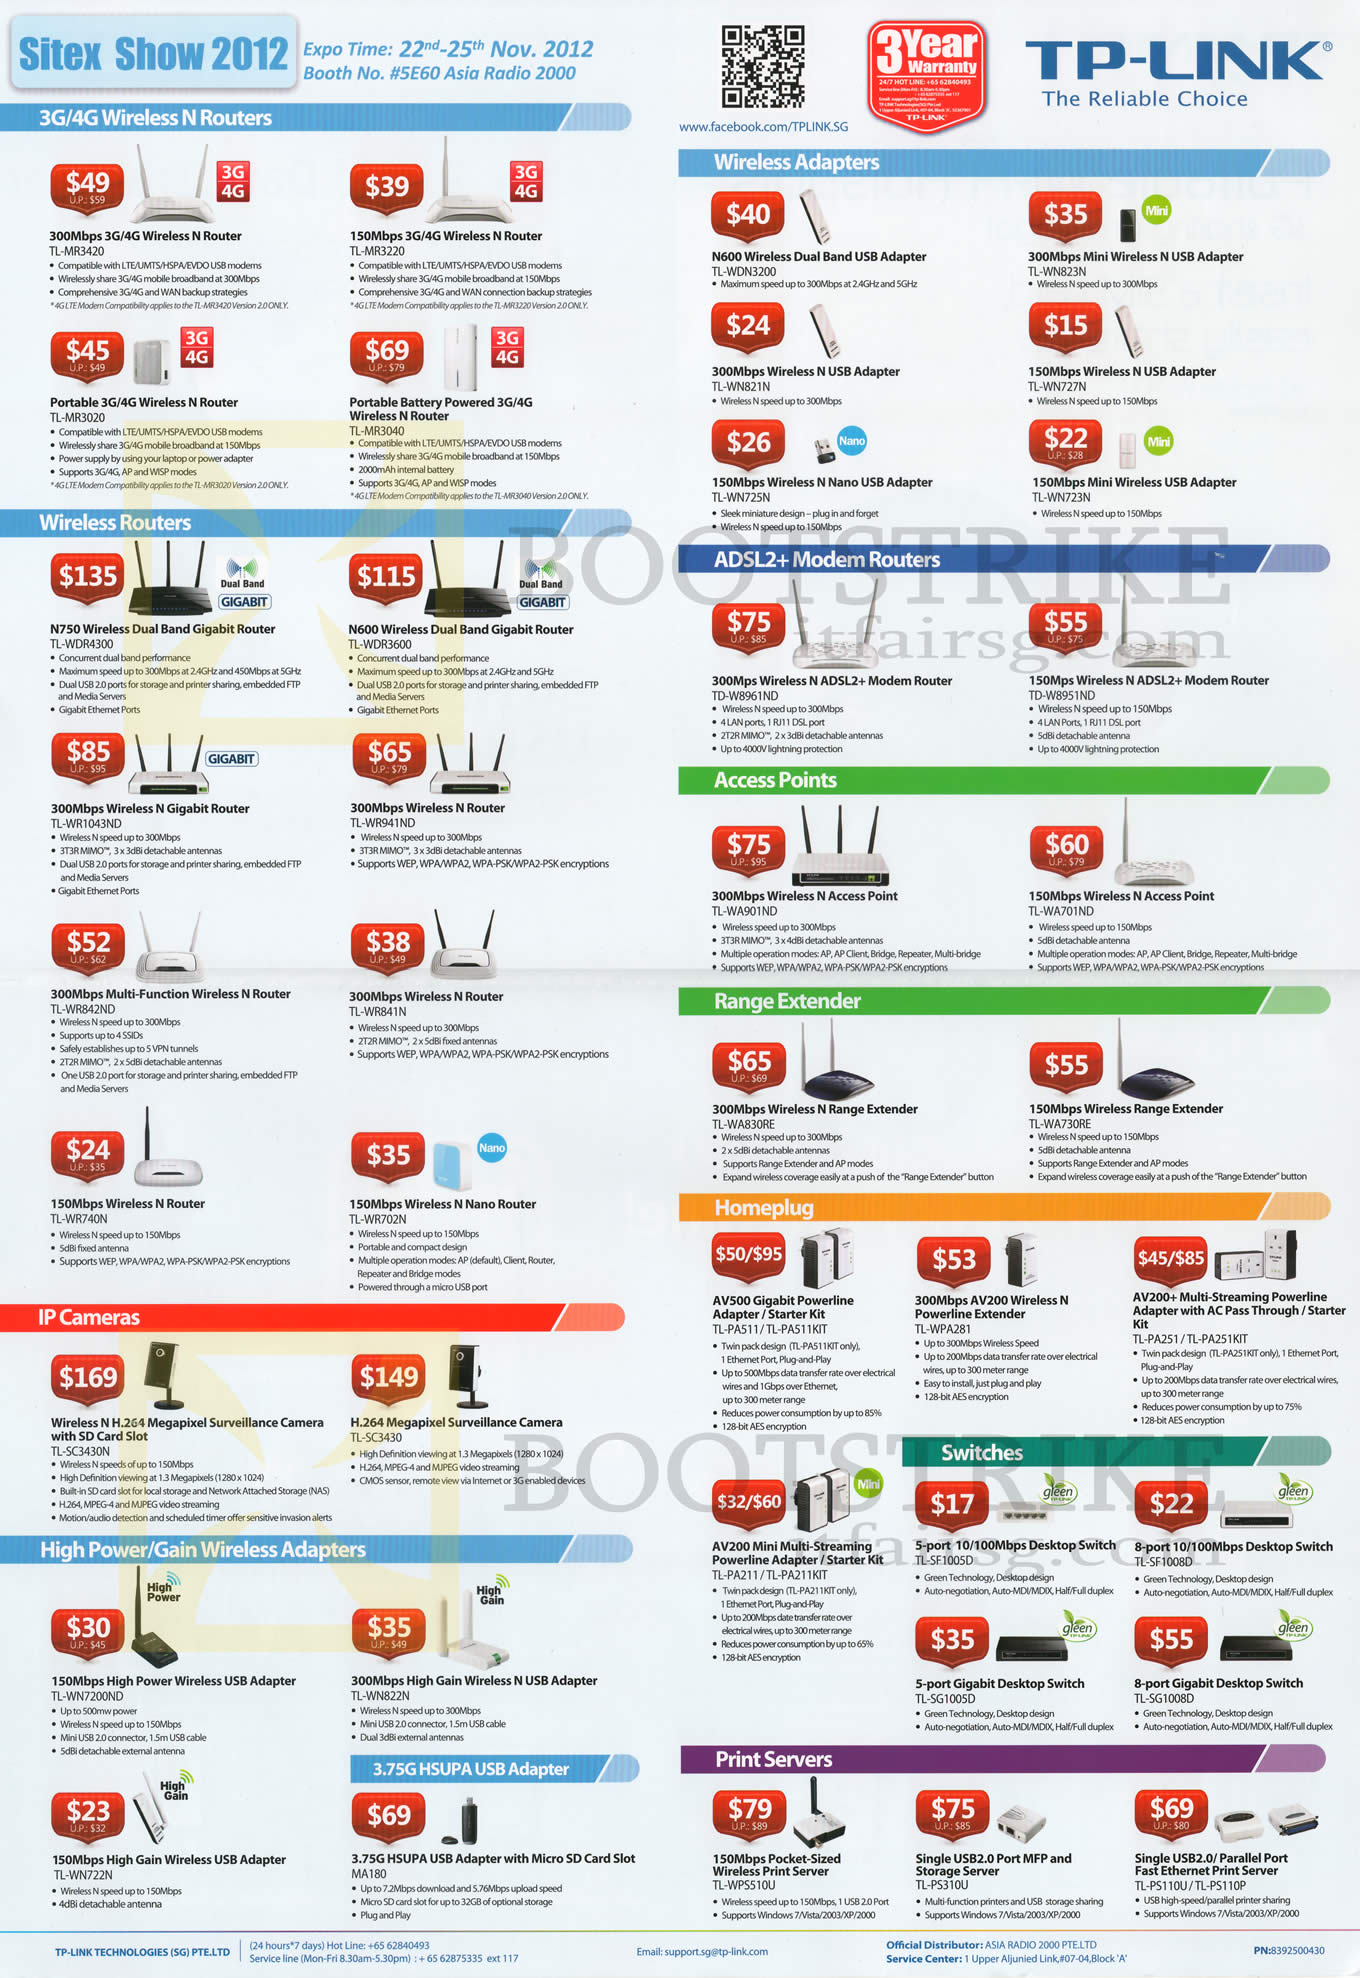 SITEX 2012 price list image brochure of Asia Radio TP-Link Networking Wireless Routers, 3G 4G, USB Adapters, ADSL Modem, Access Points, Range Extender, IPCam, HomePlug, Switches, Print Server